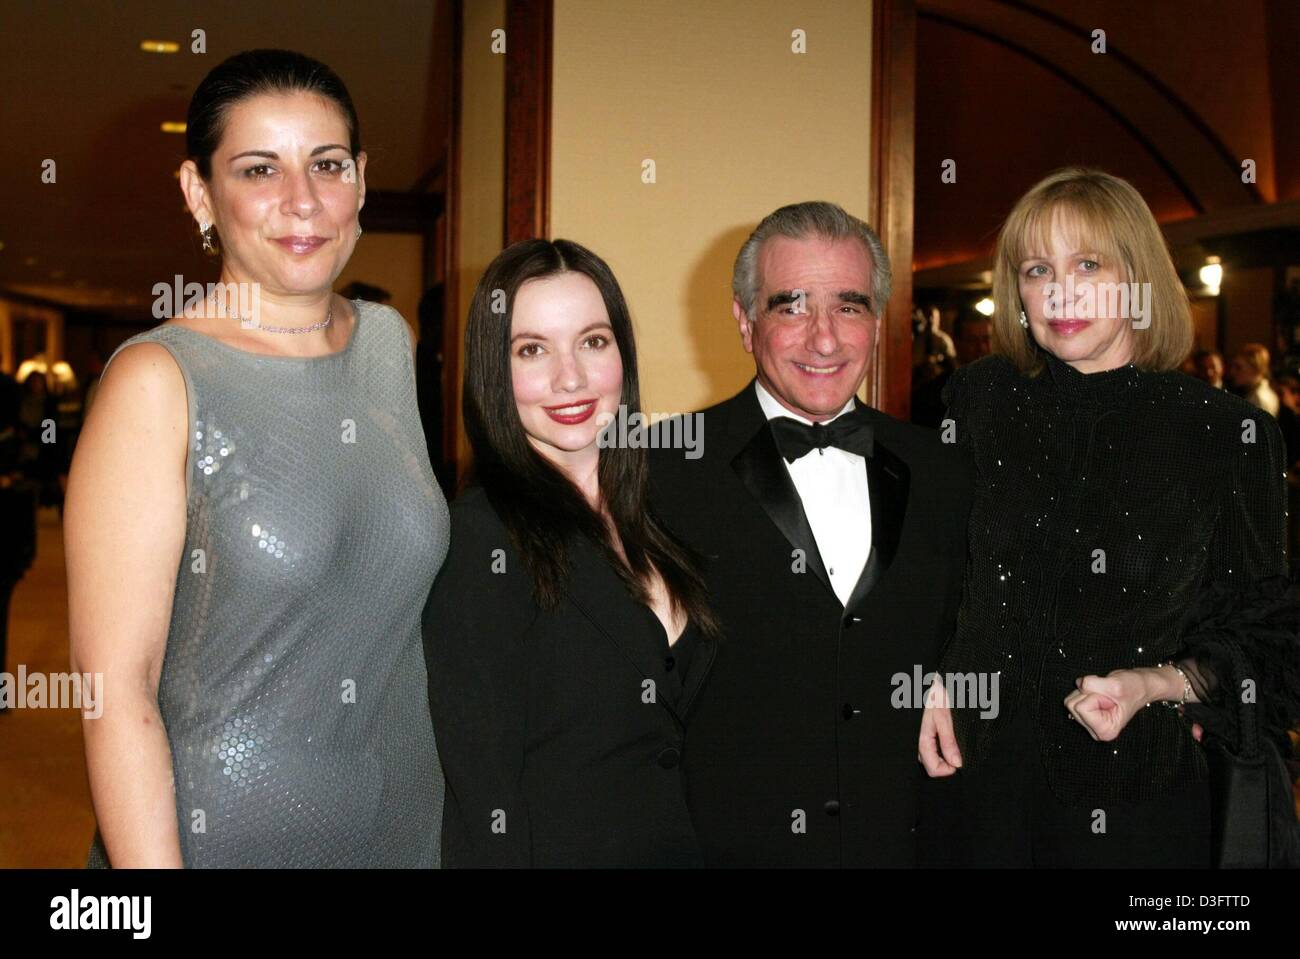 (dpa) - US film director Martin Scorsese poses with his wife Helen (R) and his daughters Julia (L) and Domenica Cameron from a previous marriage, backstage at the Directors Guild of America (DGA) awards show in Los Angeles, 1 March 2003. Scorsese won the DGA Lifetime Achievement Award for distinguished achievement in Motion Picture Direction. Stock Photo